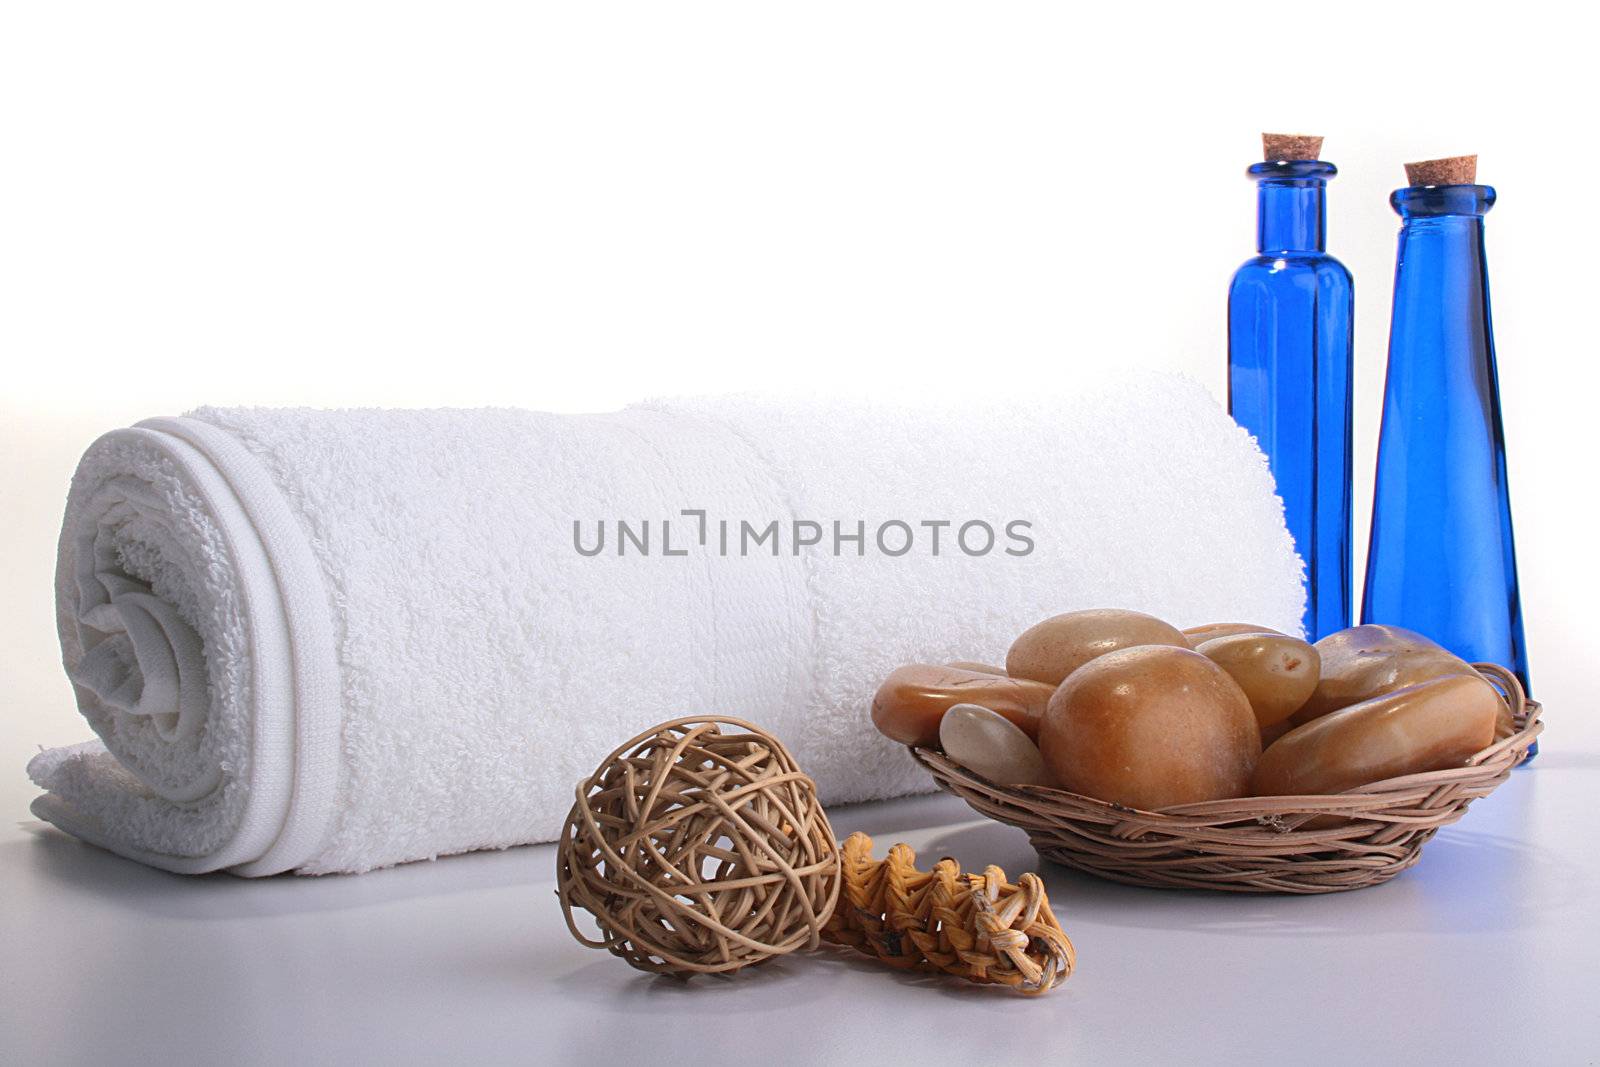 Two bottles of dark blue glass, towel it is curtailed into a roll, sea stones in a basket and an aromatic tree.